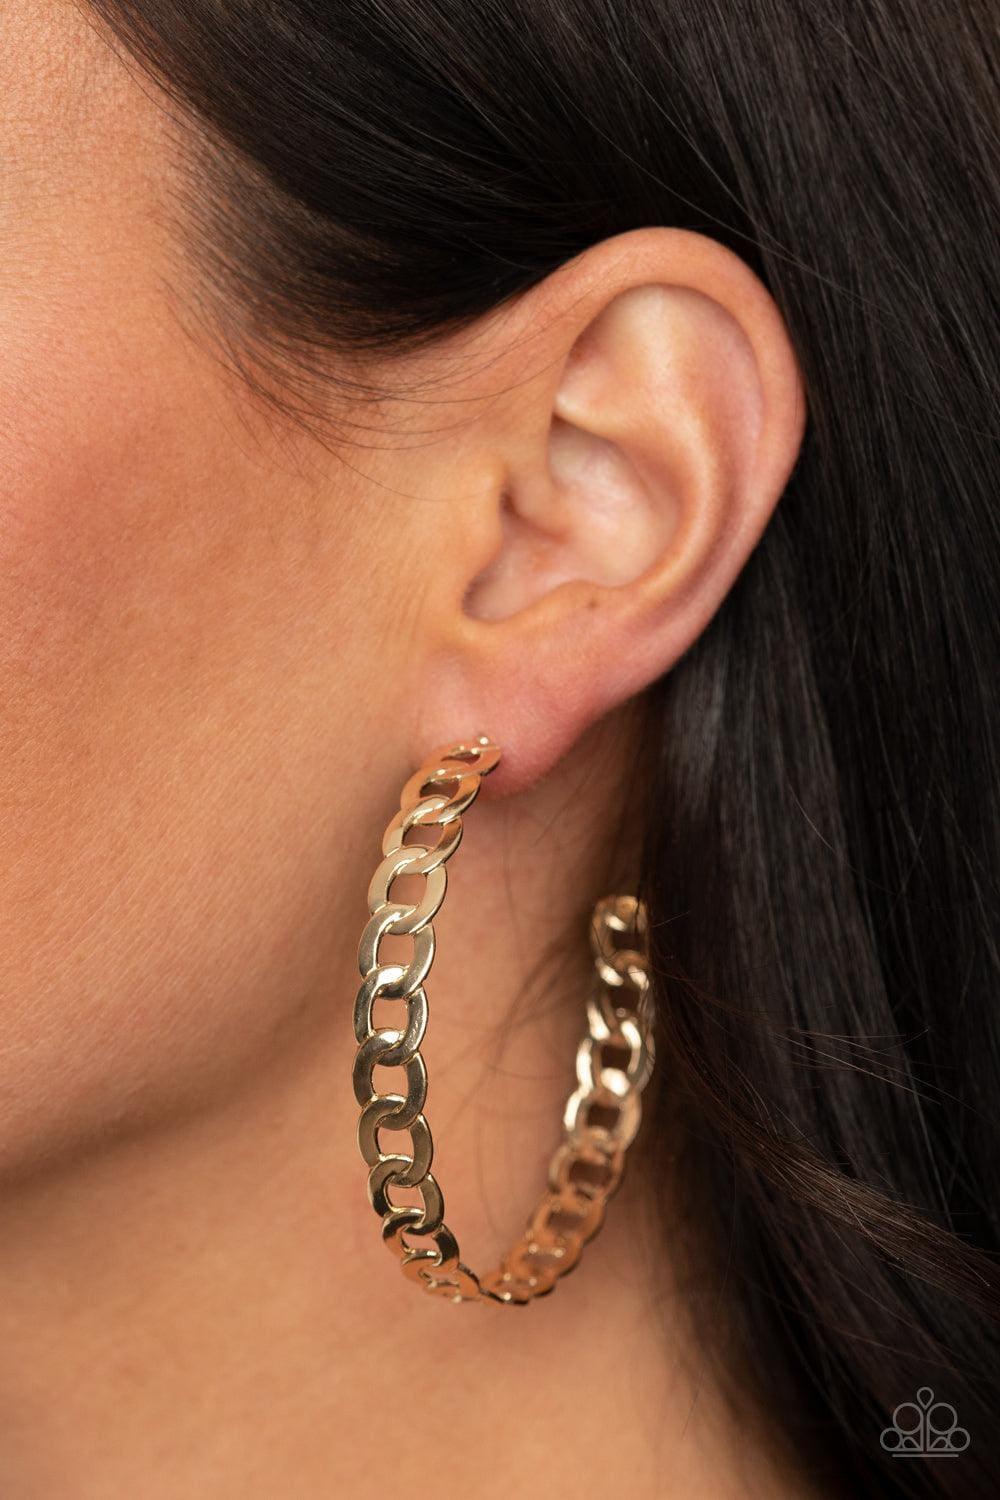 Paparazzi Accessories - Climate Chainge - Gold Earrings - Bling by JessieK